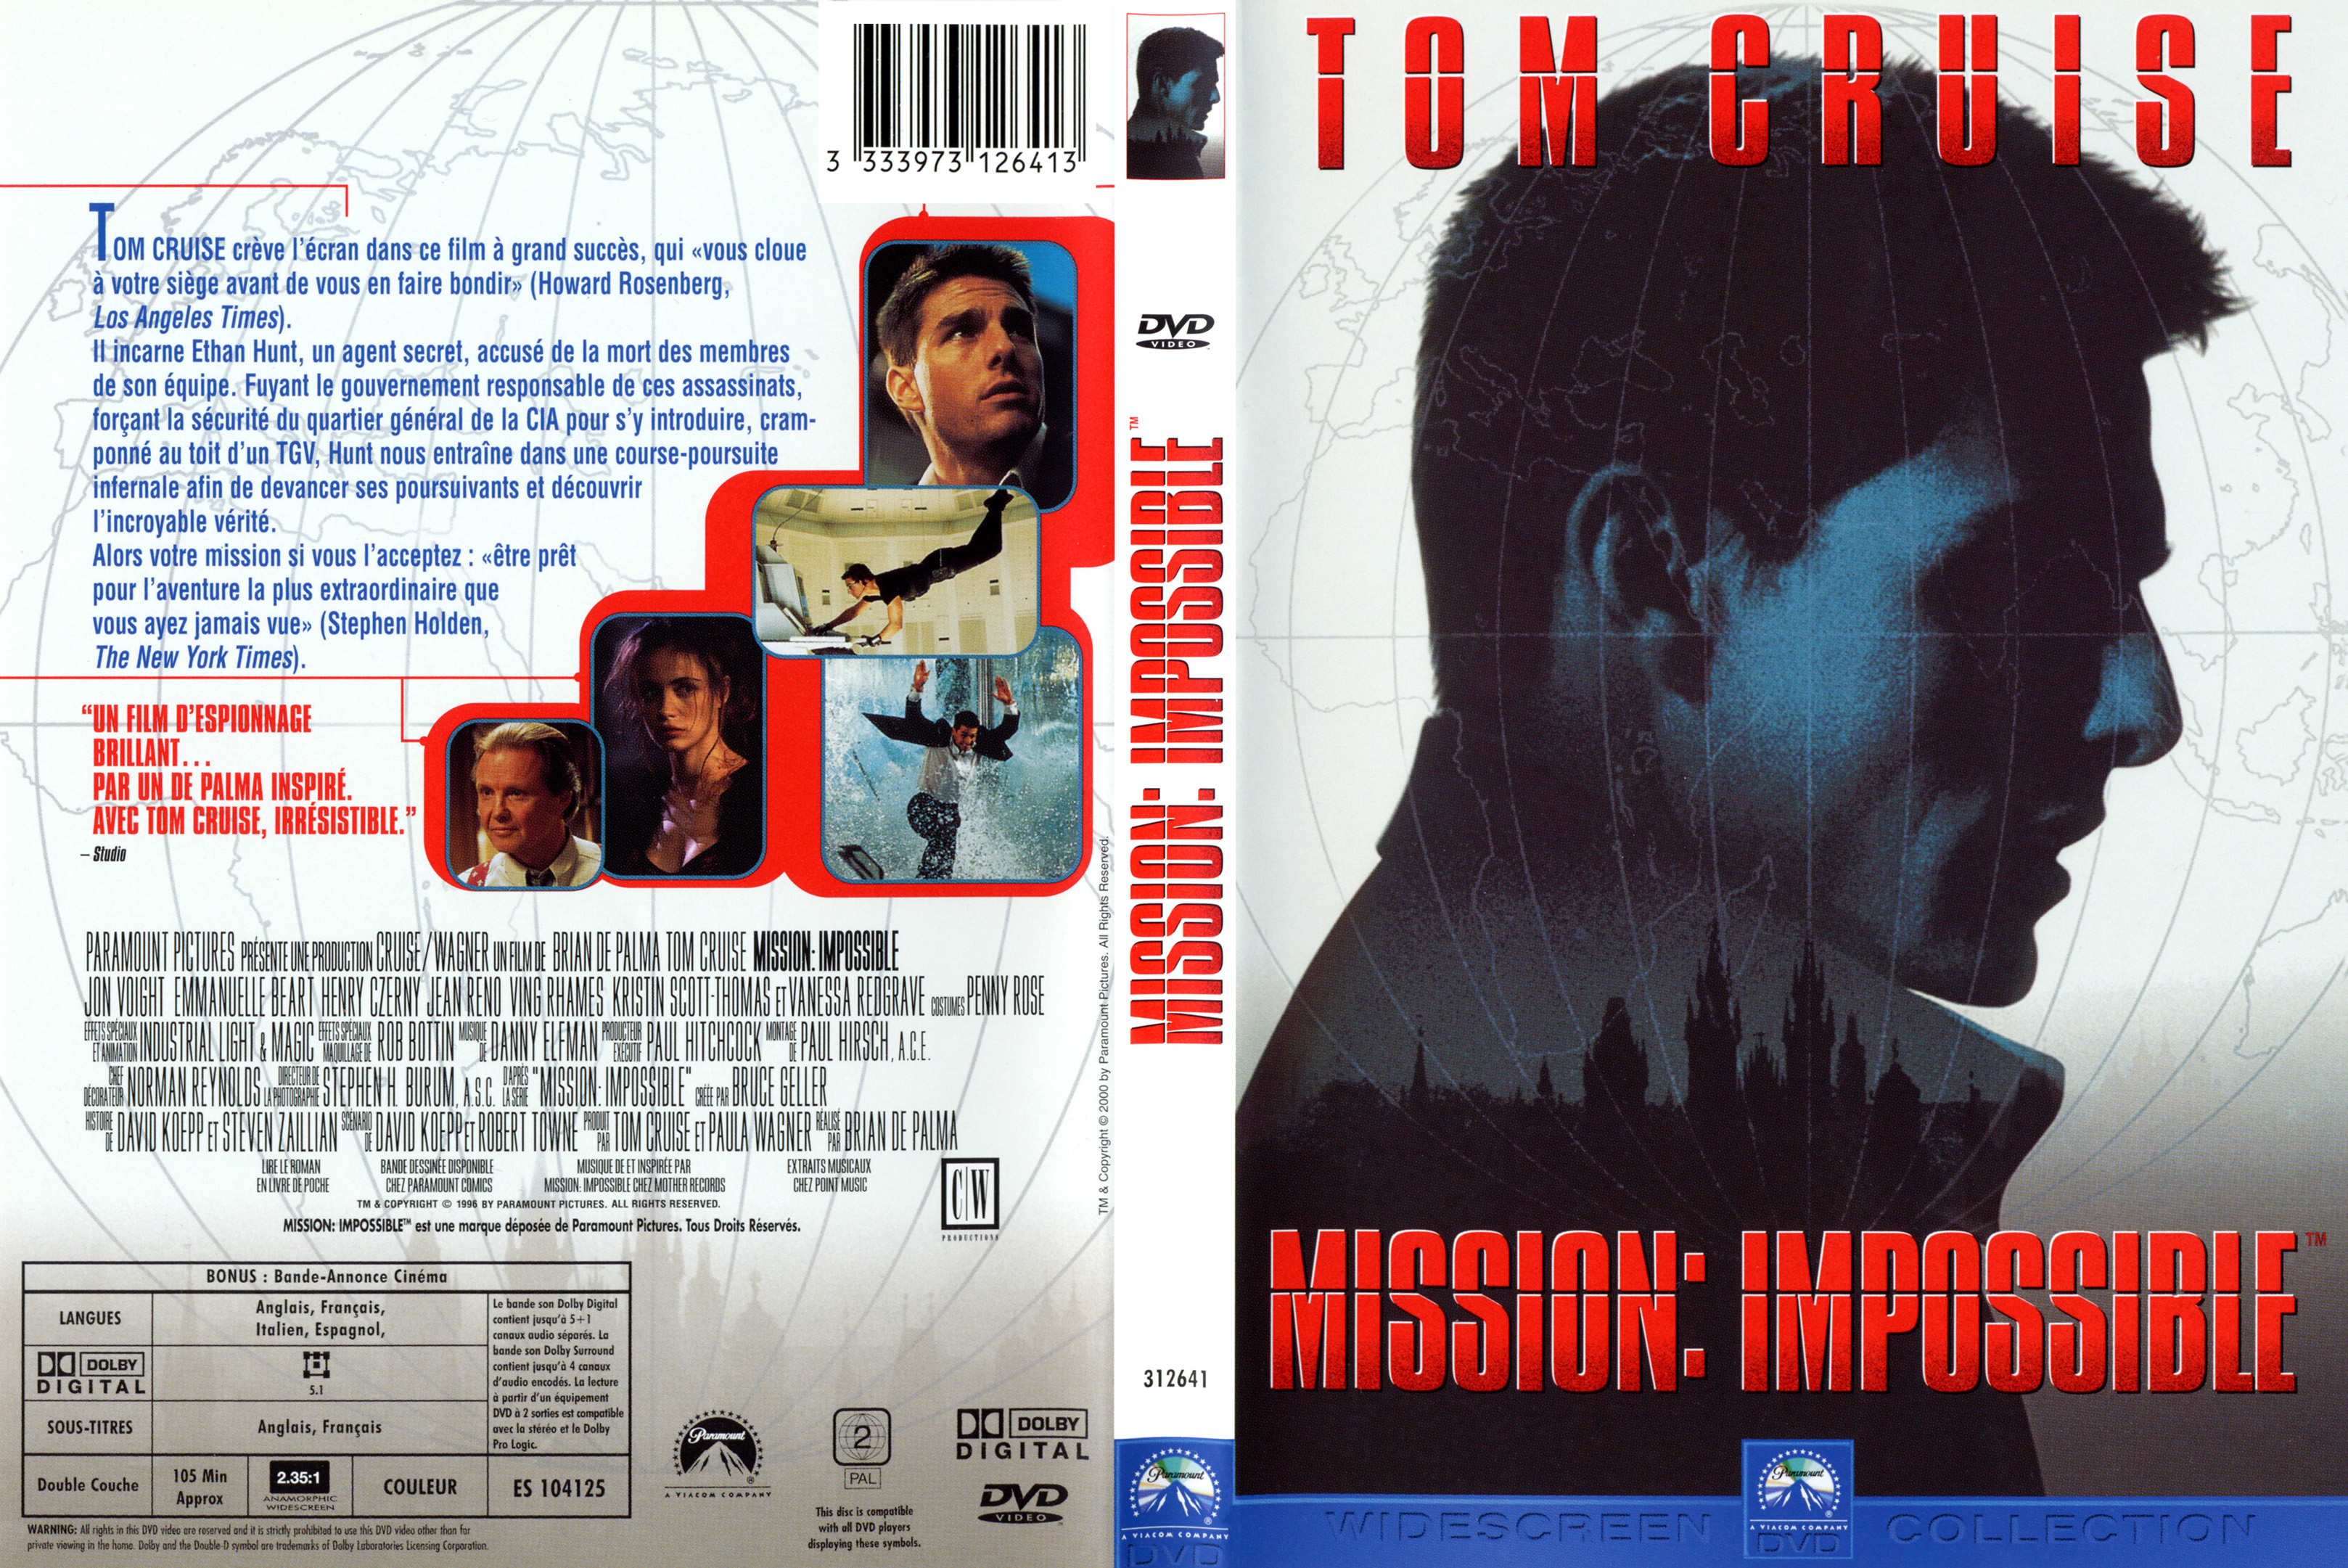 Jaquette DVD Mission impossible